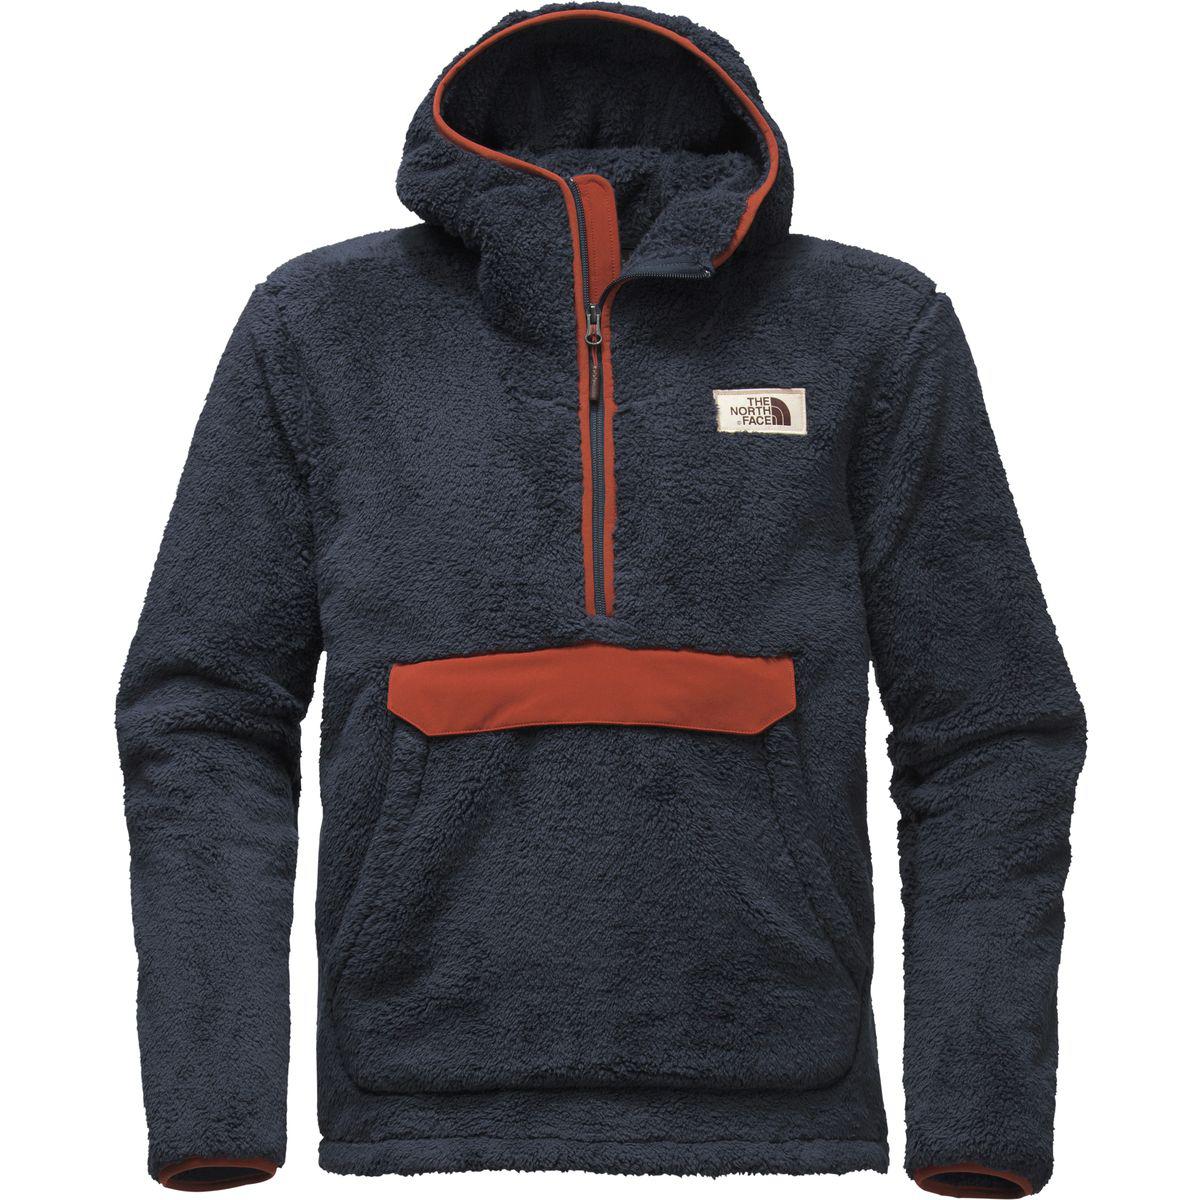 The North Face Fleece Campshire Hooded Pullover Hoodie in Blue for Men - Lyst